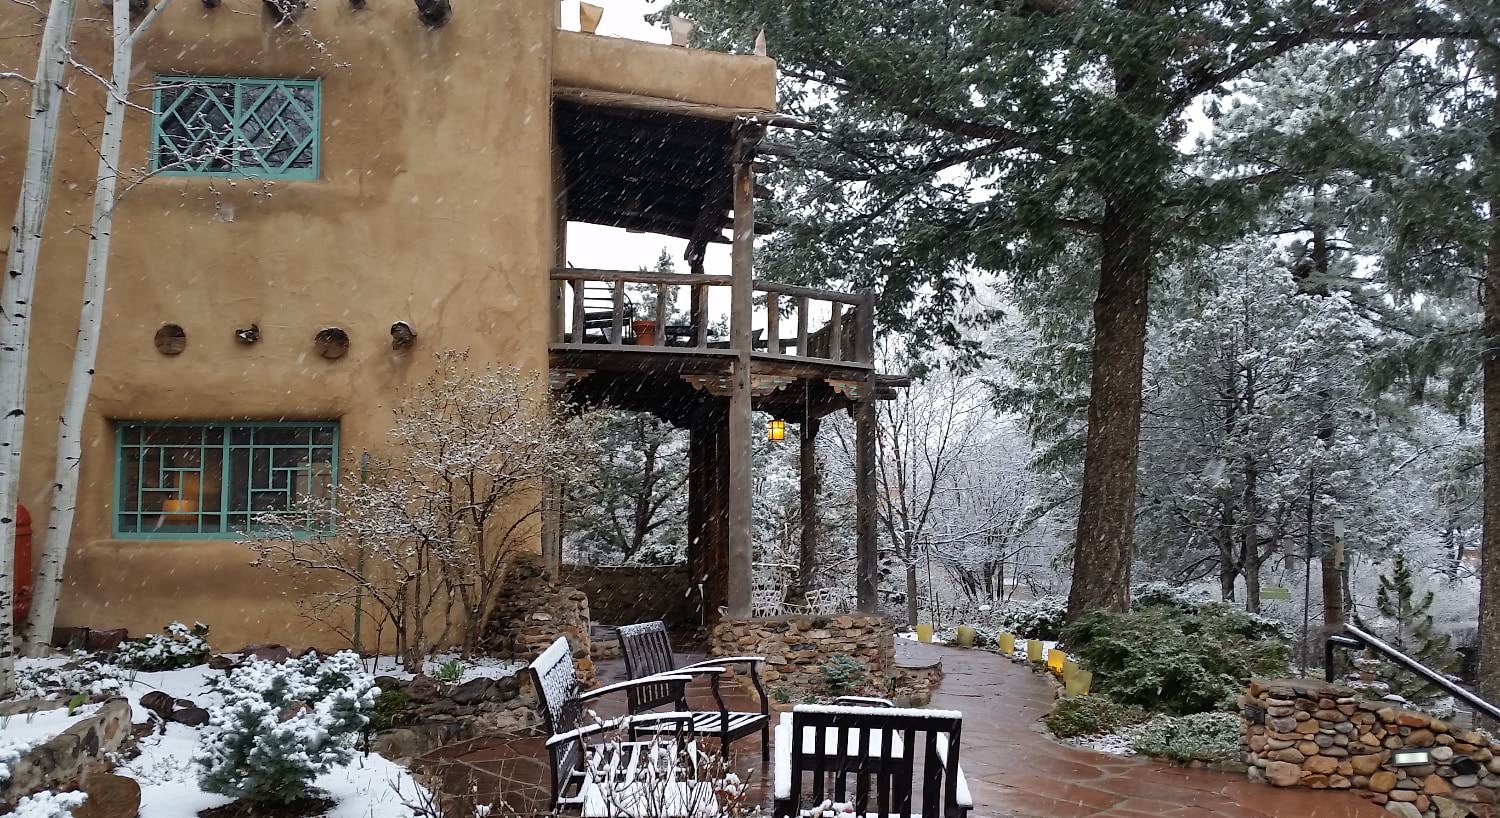 Exterior view of the property surrounded by large green trees with snow coming down, covering patio furniture and vegetation